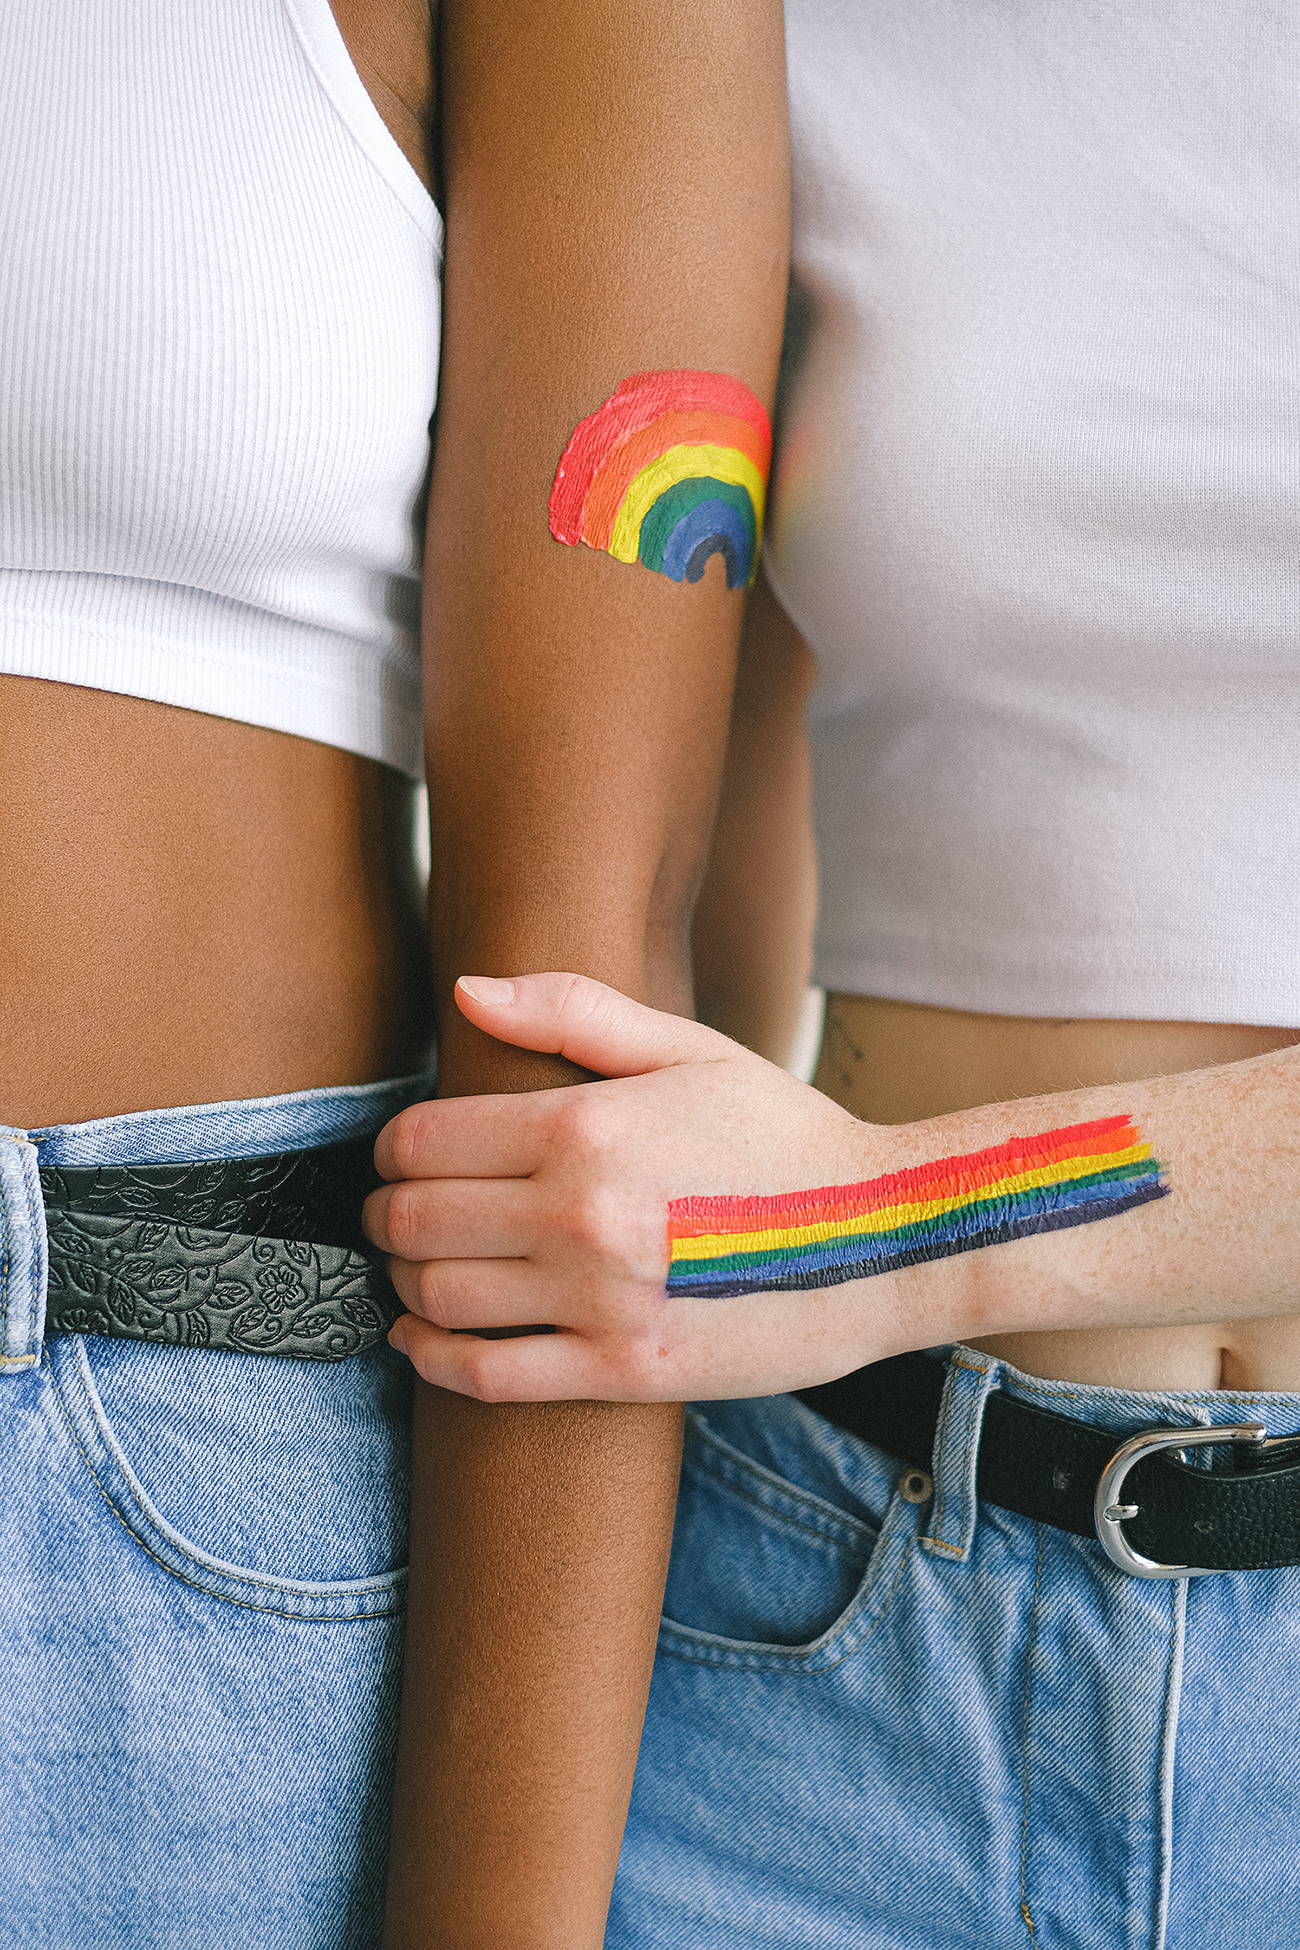 A sustainable pride march is about celebrating the LGBTQ+ community while adopting eco-friendly practices such as the reuse and repurposing of materials